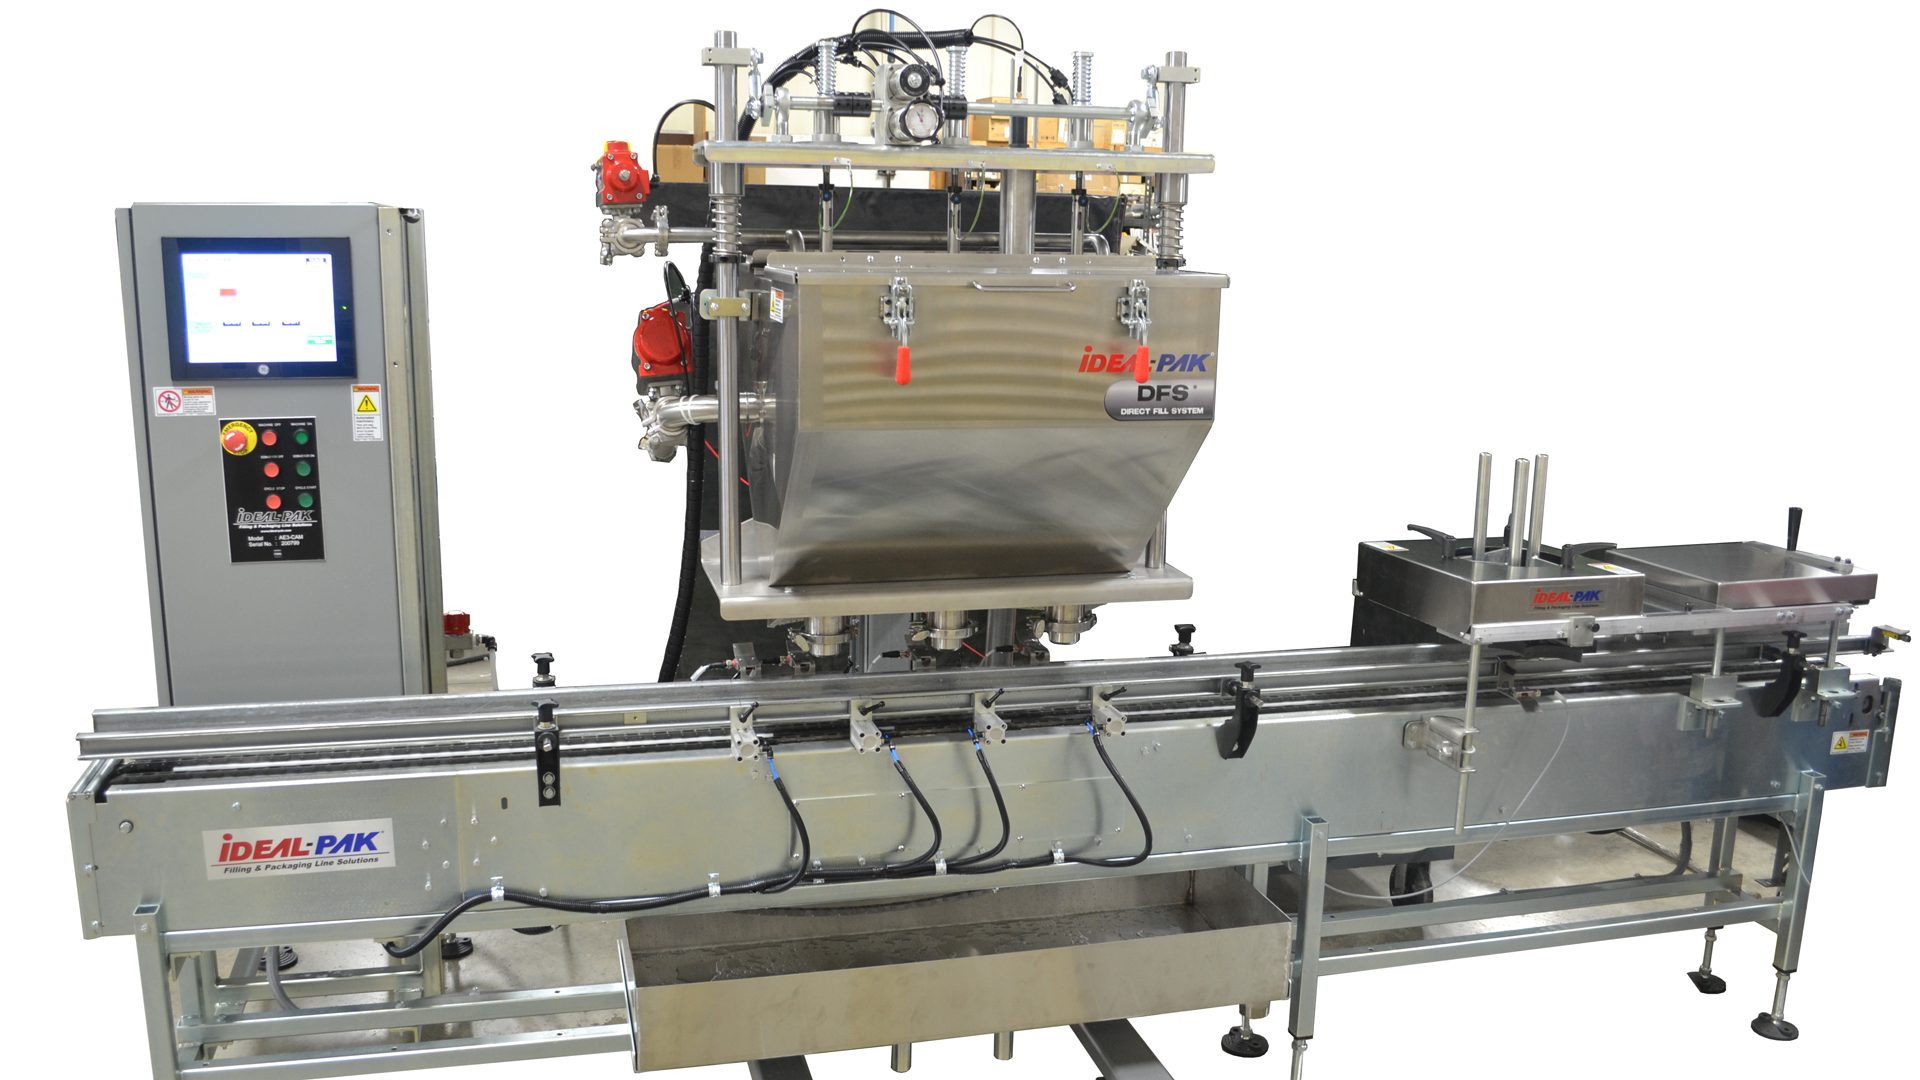 3-head filling machine with DFS Cart for Pint to Gallon Cans.